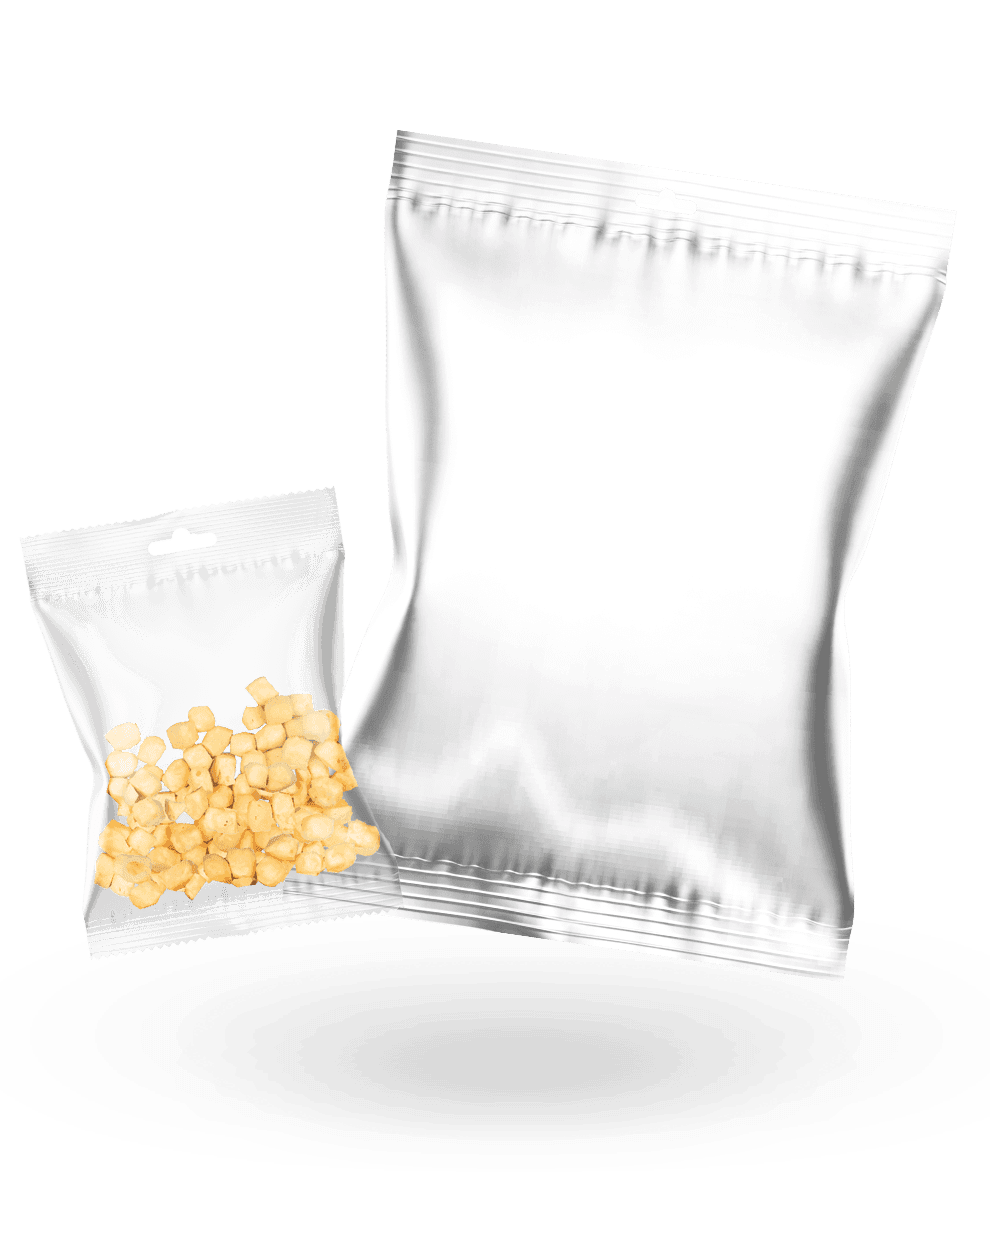 Product: Non-branded popped or grated cheese - Cheesepop food group